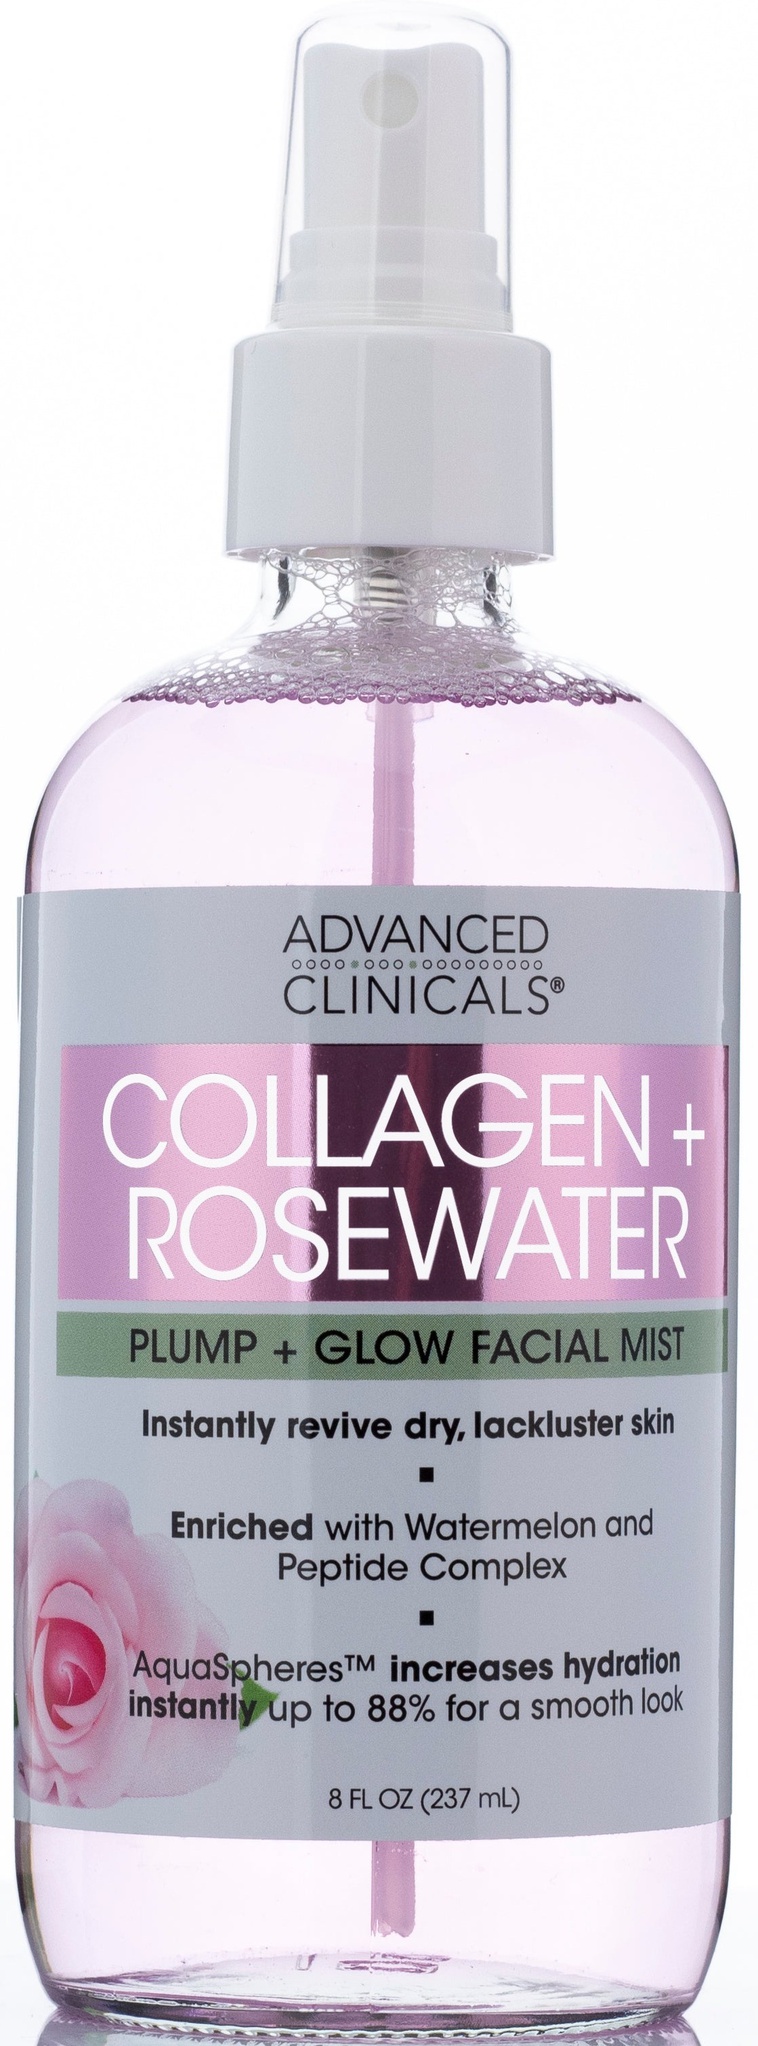 Advanced Clinicals Collagen And Rose Water Face Mist